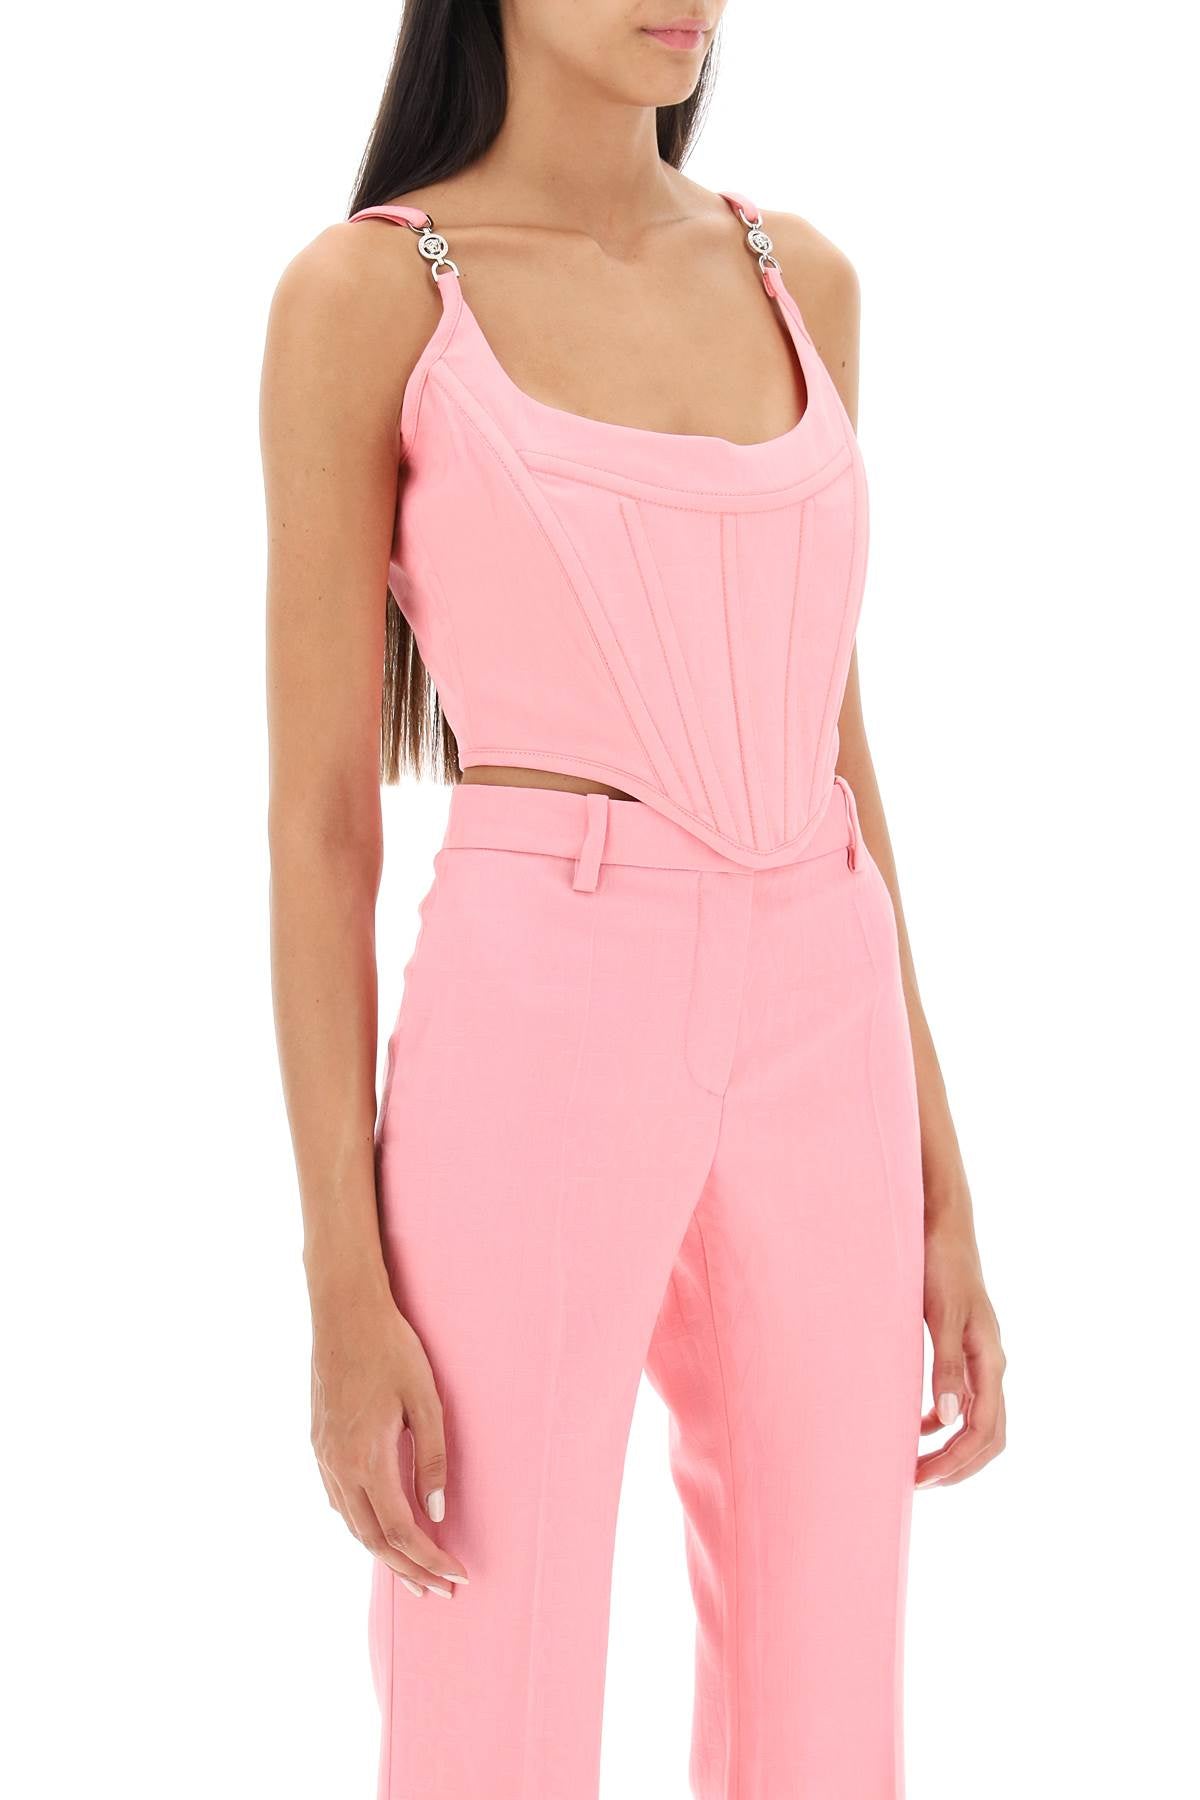 Pink Monogram Corset Top for Women - Twill Material with Iconic Versace Design